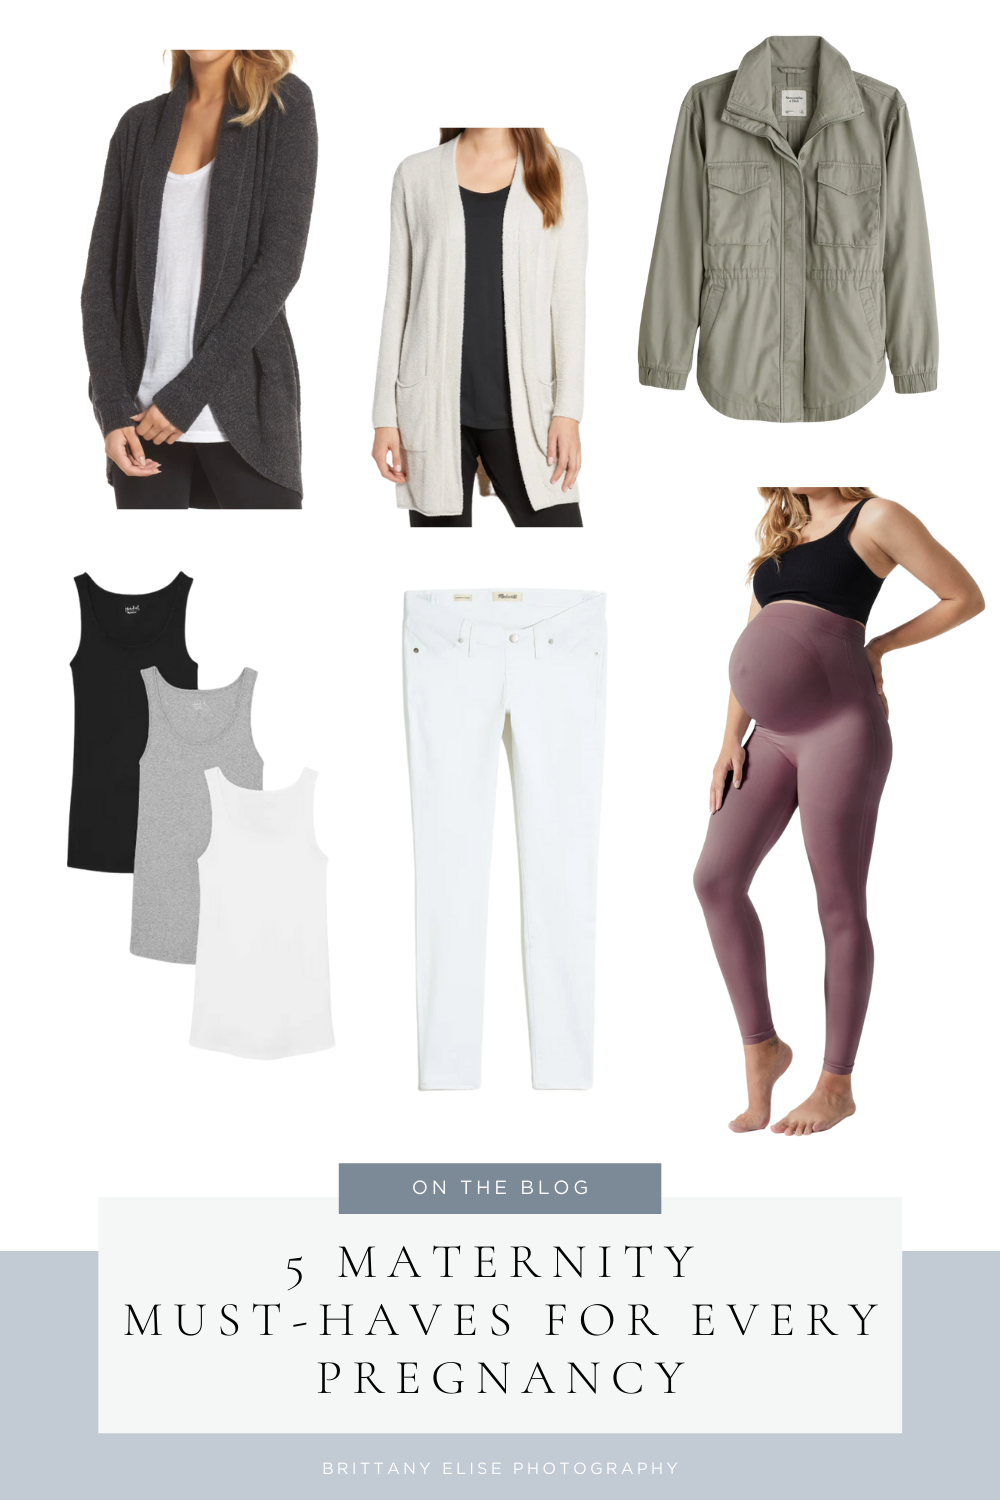 8 Inexpensive Maternity Clothes You Should Buy for Maternity Baby